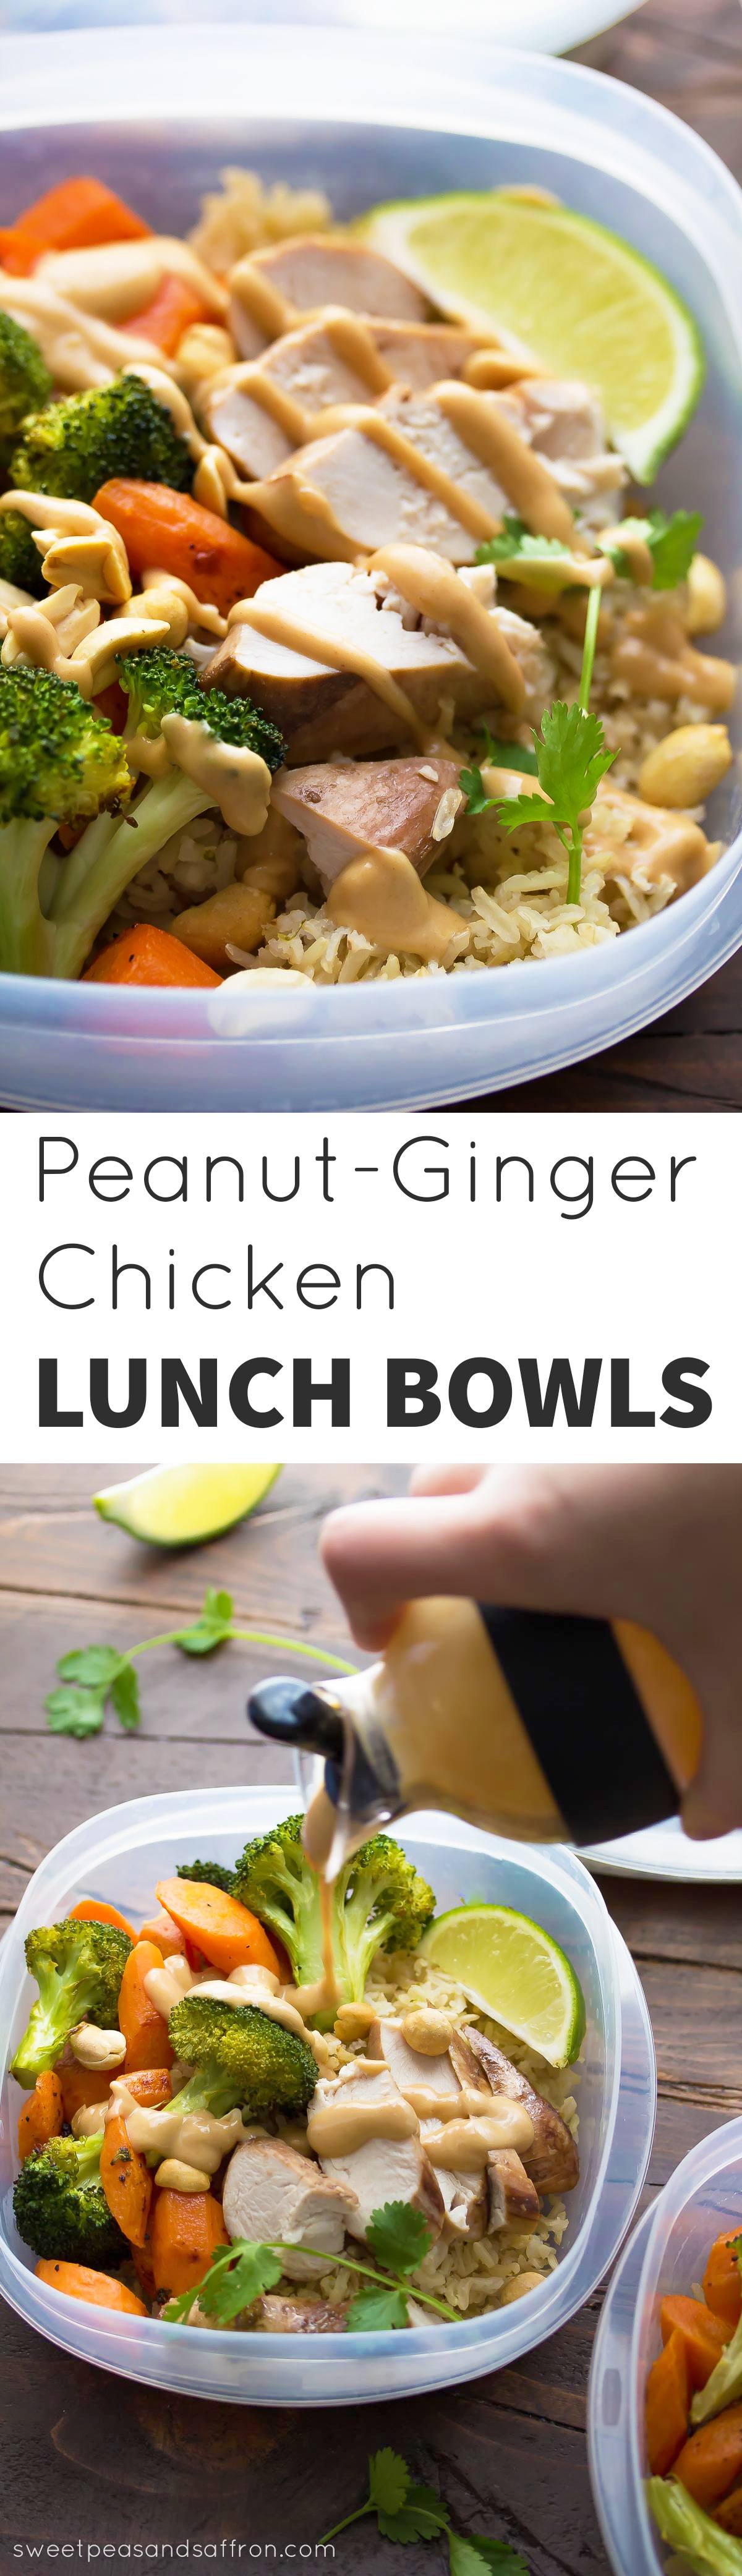 Healthy Lunch Recipes That Are Tasty and Easy